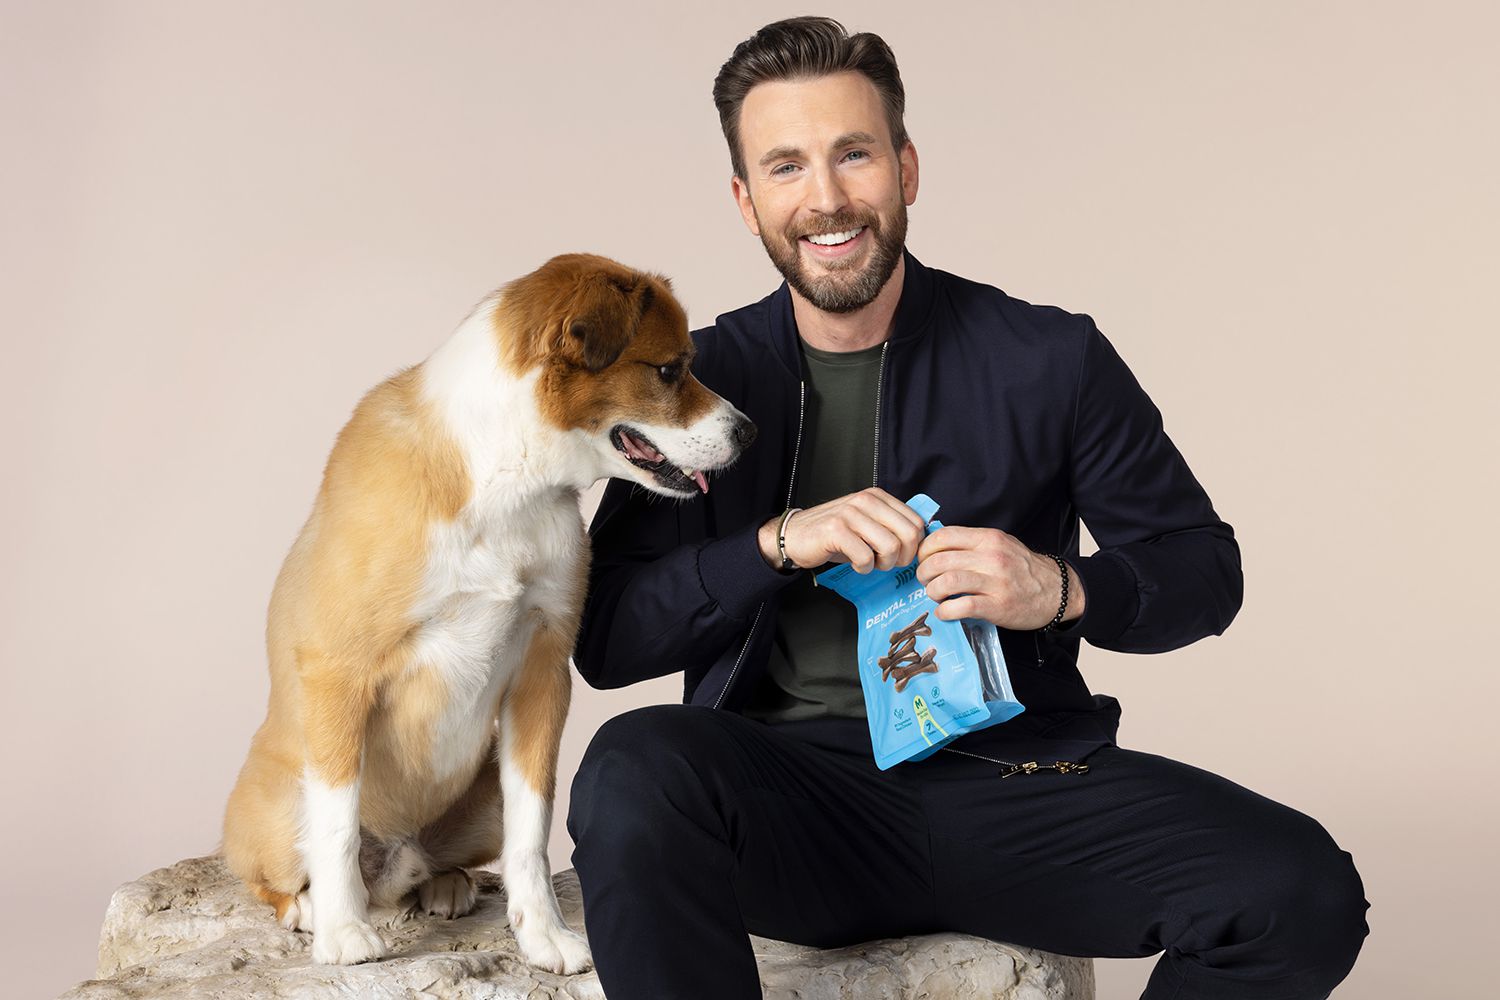 Chris Evans Says His Pet Dodger Is 'a Cut Above the Average Dog,' But Admits 'I'm Probably Biased'